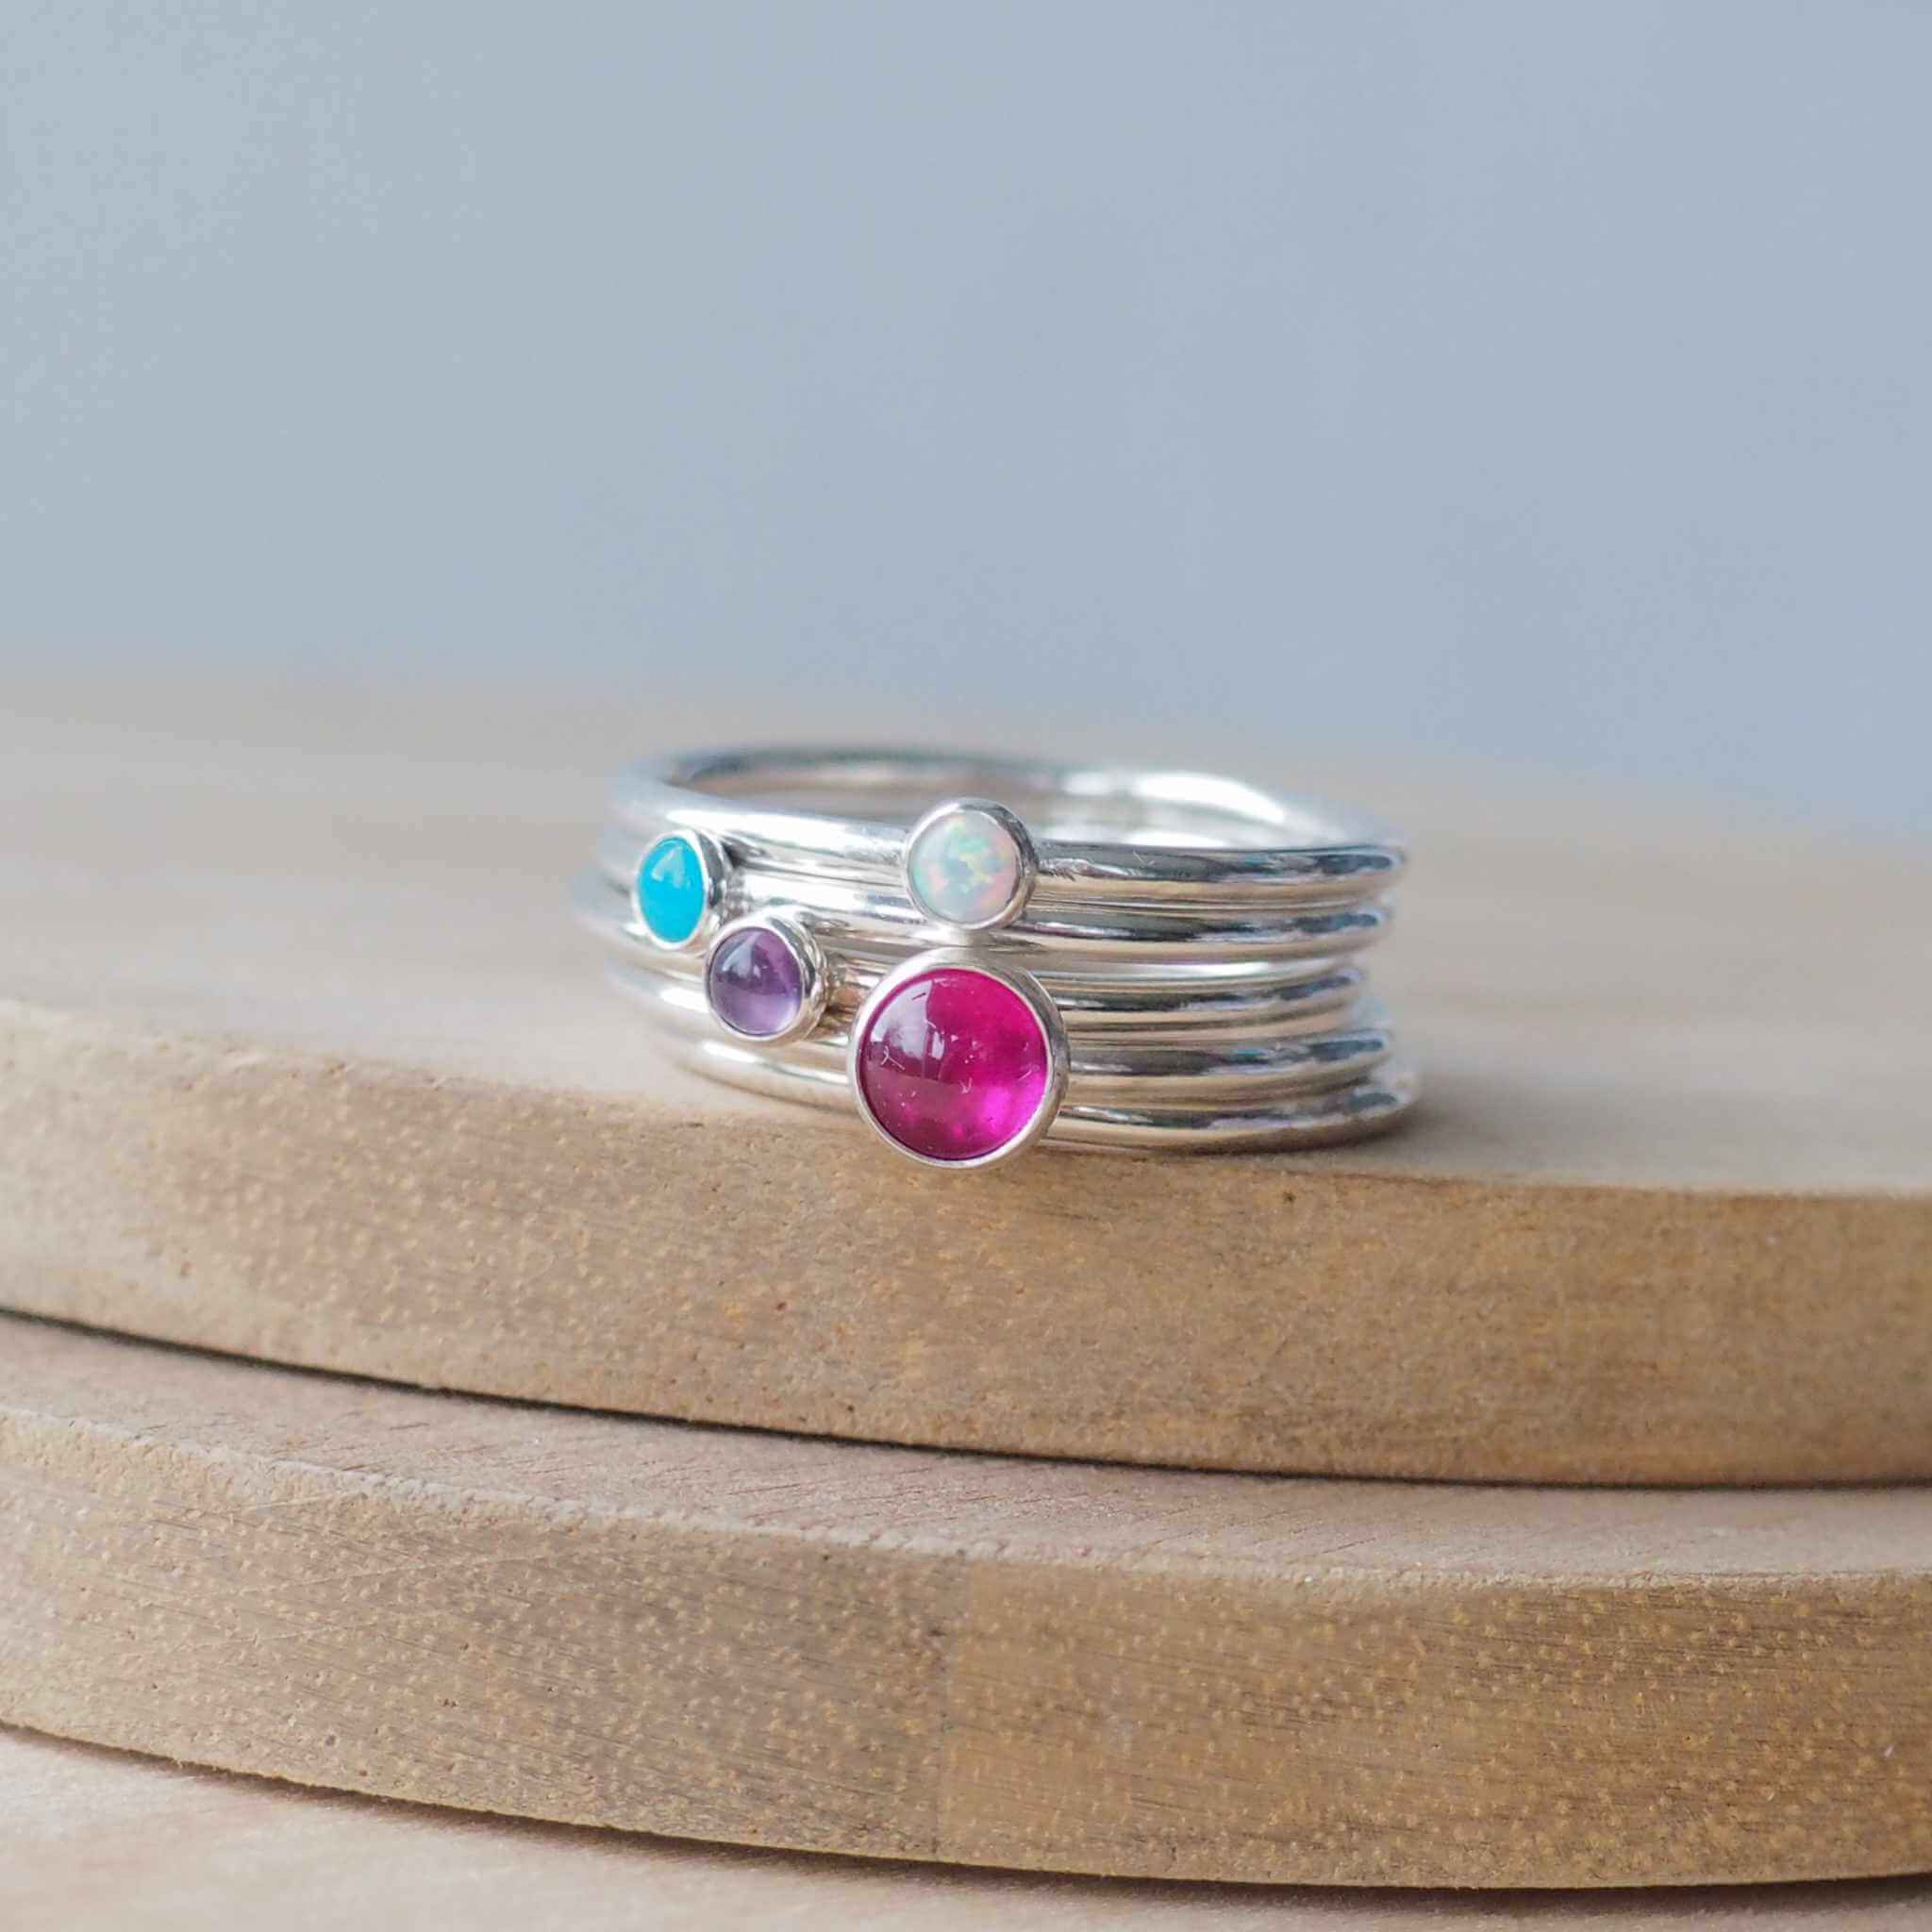 Four Birthstone ring set with July Main Birthstone, Lab Ruby, and any other three birthstones. The stones in the image are a hot pink 5mm lab ruby,and  3mm peridot, Turquoise, and Lab Ruby . Four separate rings all in Sterling Silver, and handmade in Edinburgh by Maram Jewellery